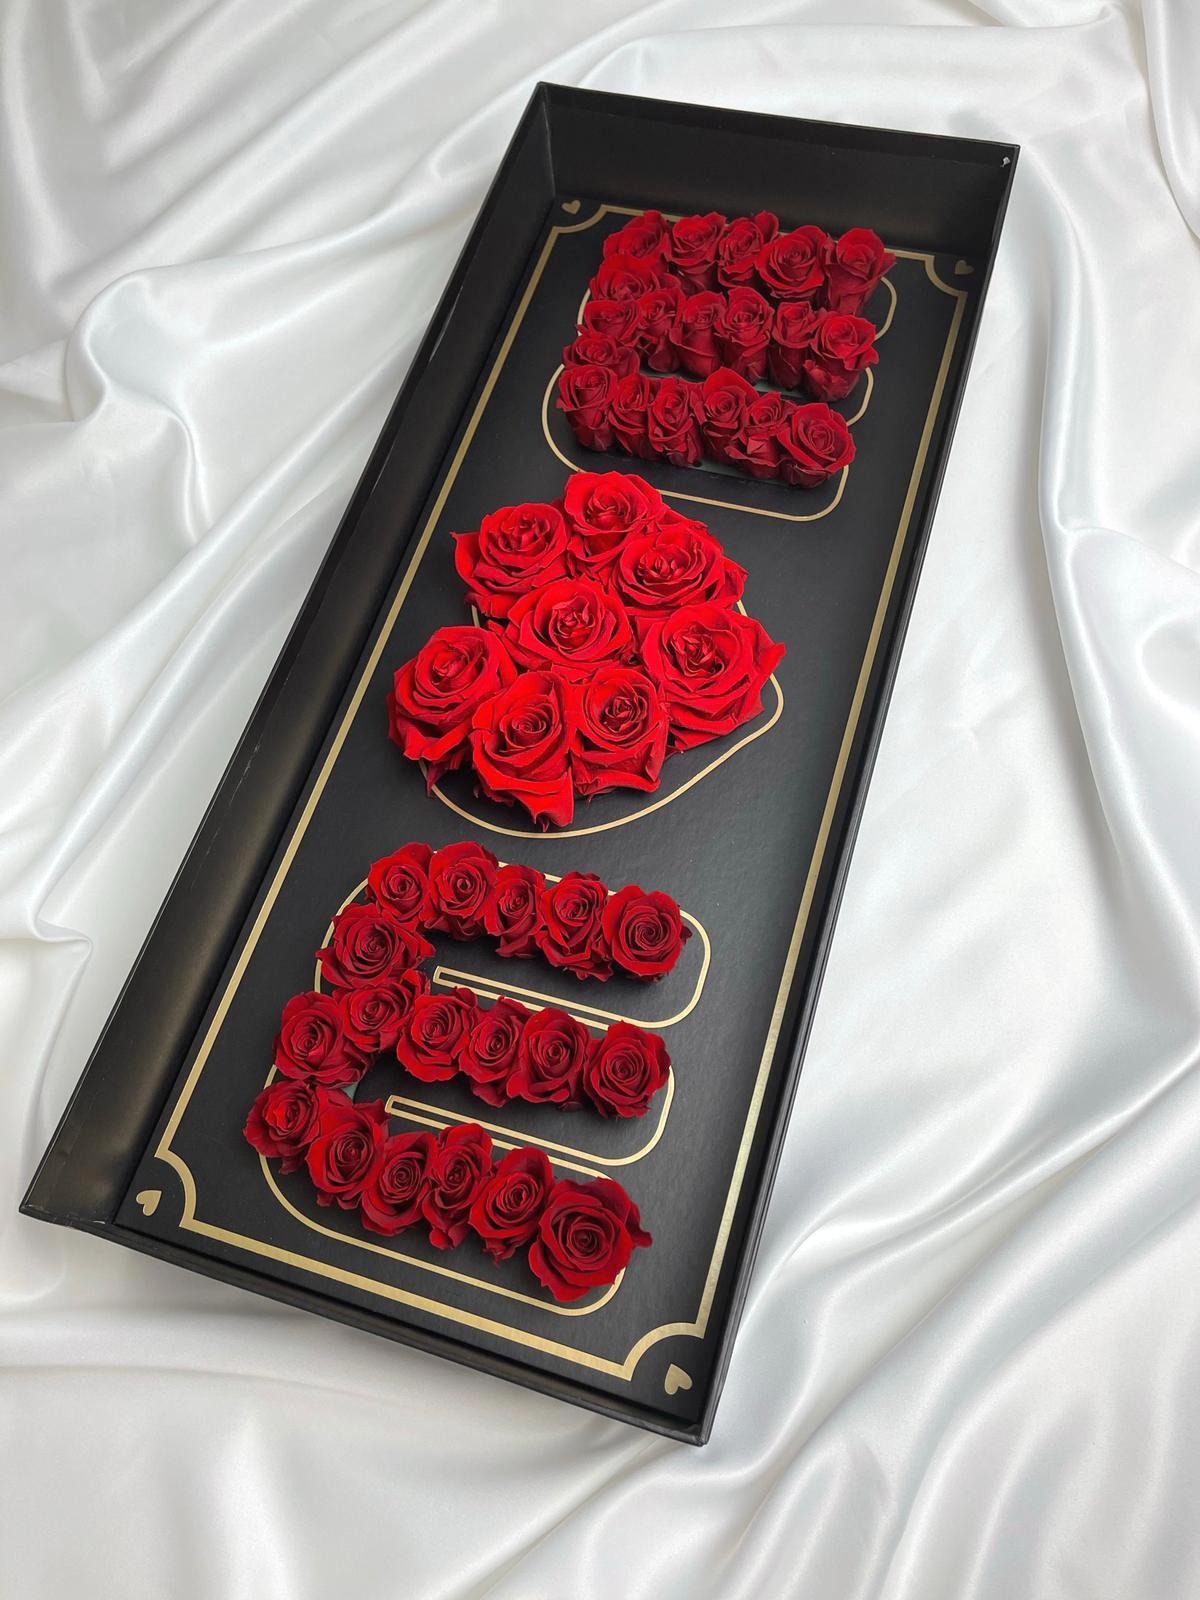 box that says MOM with red roses on it